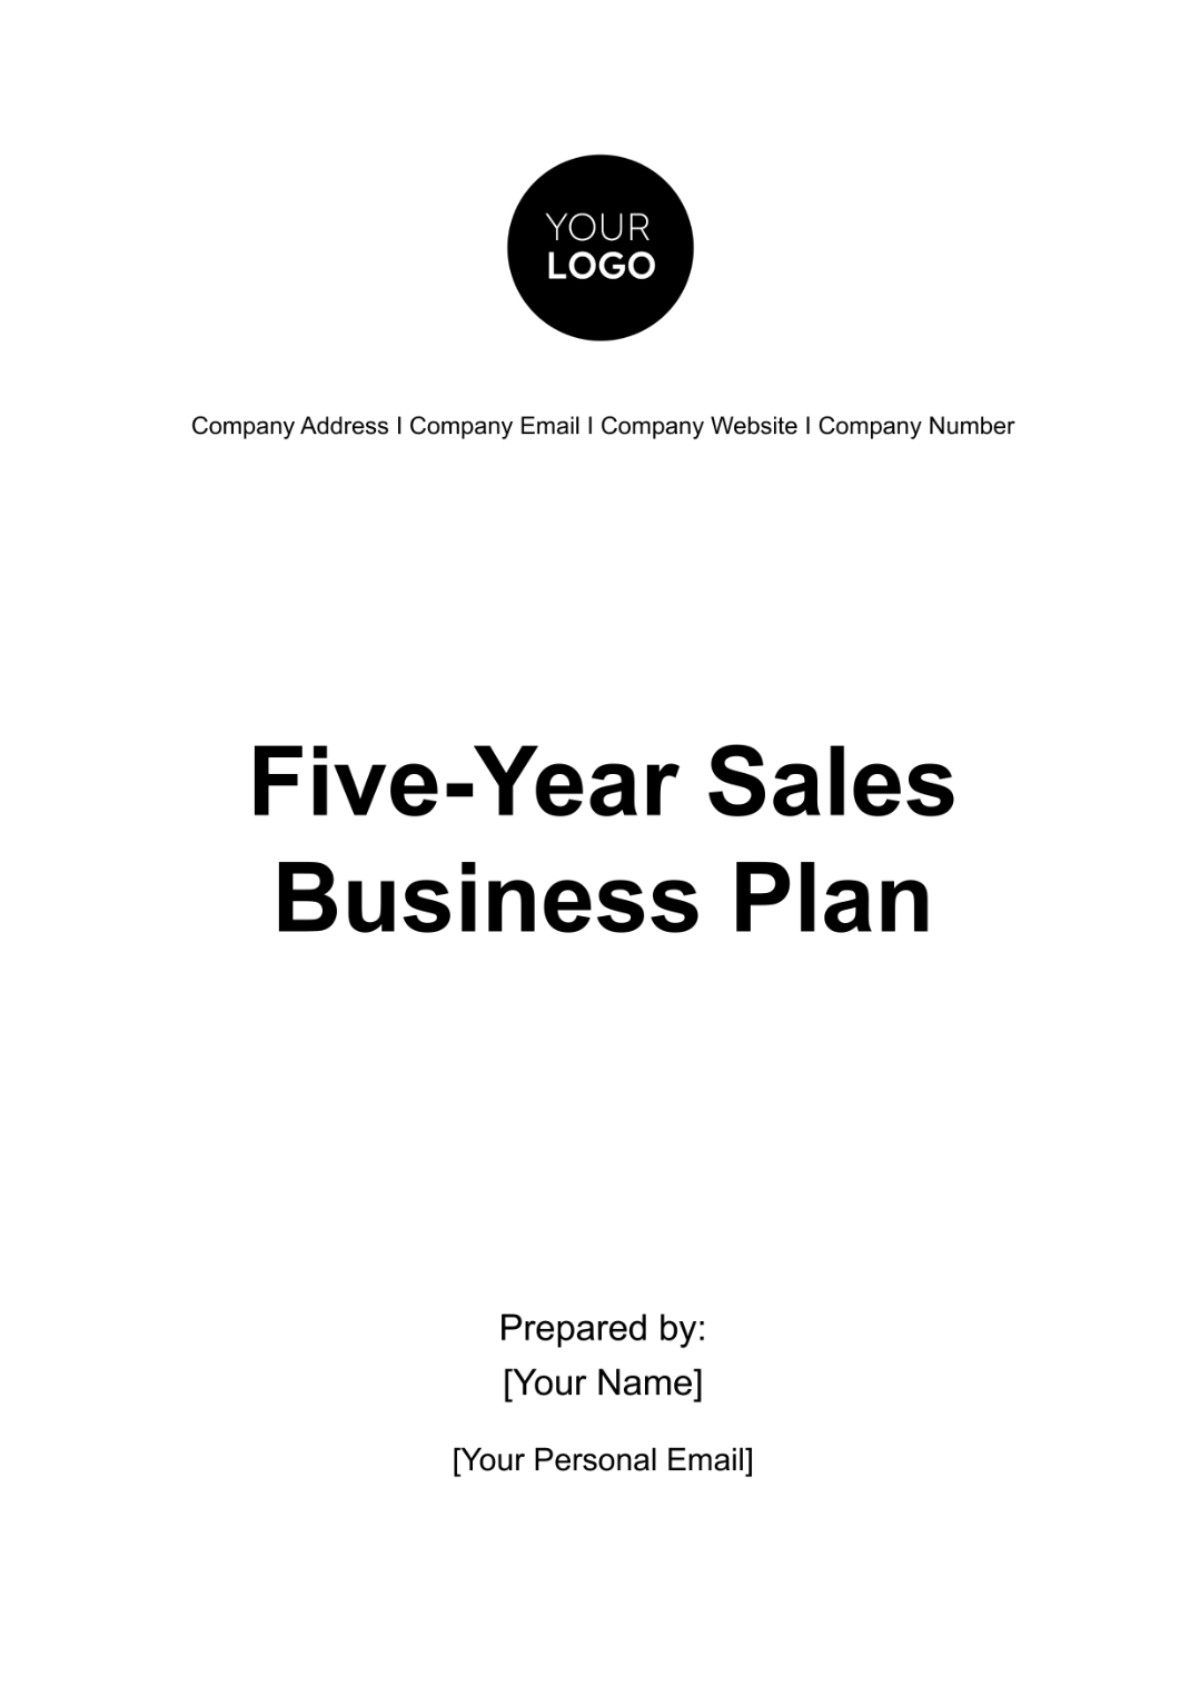 Five-Year Sales Business Plan Template